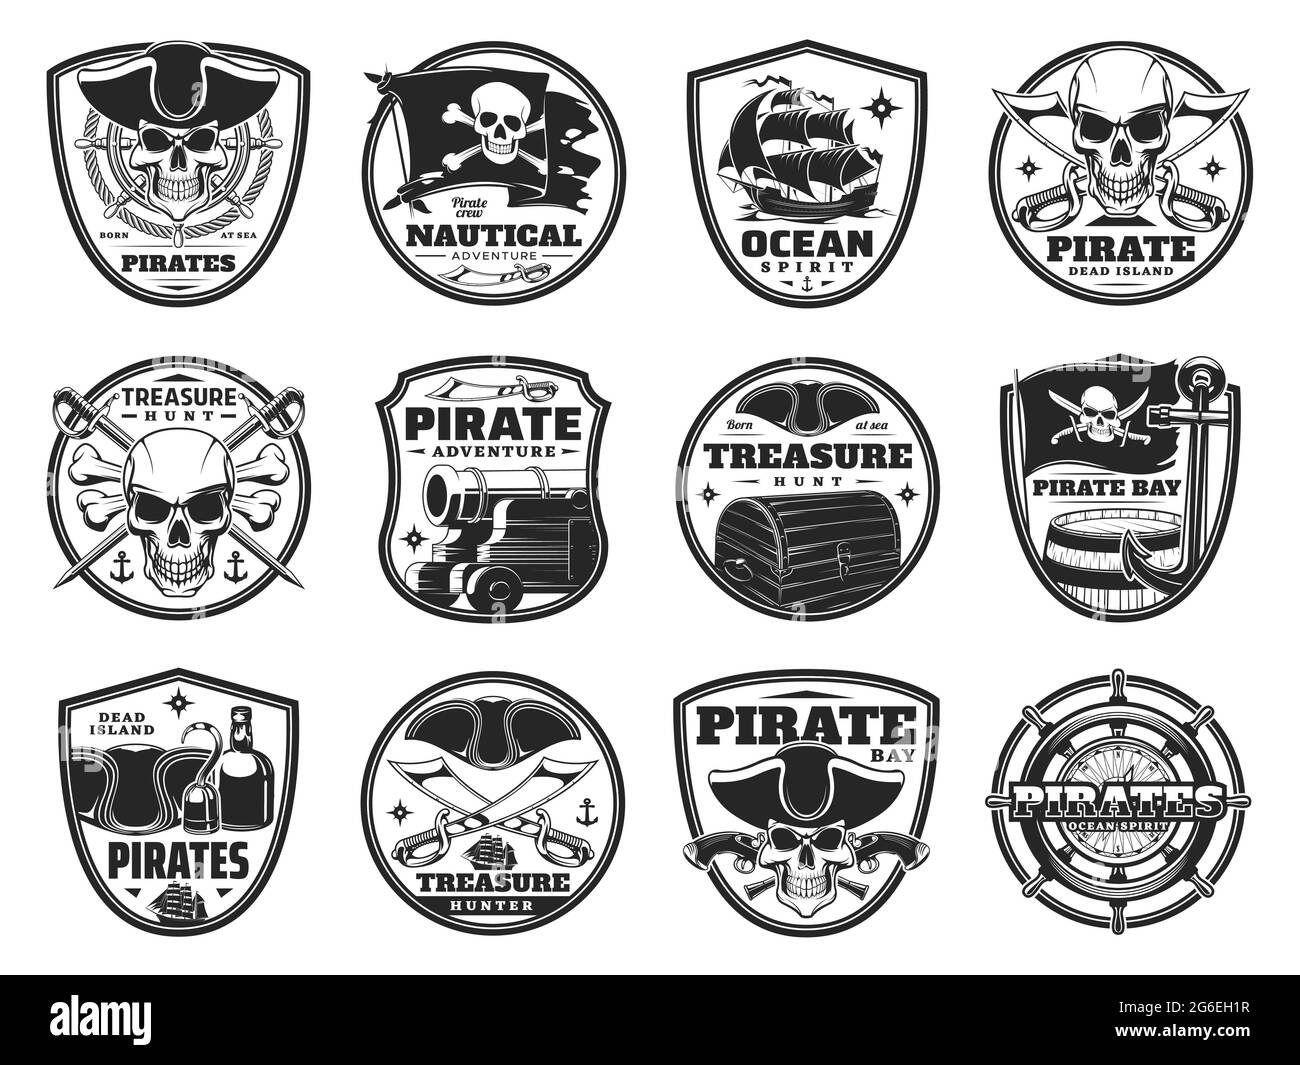 The pirate bay logo Black and White Stock Photos & Images - Alamy